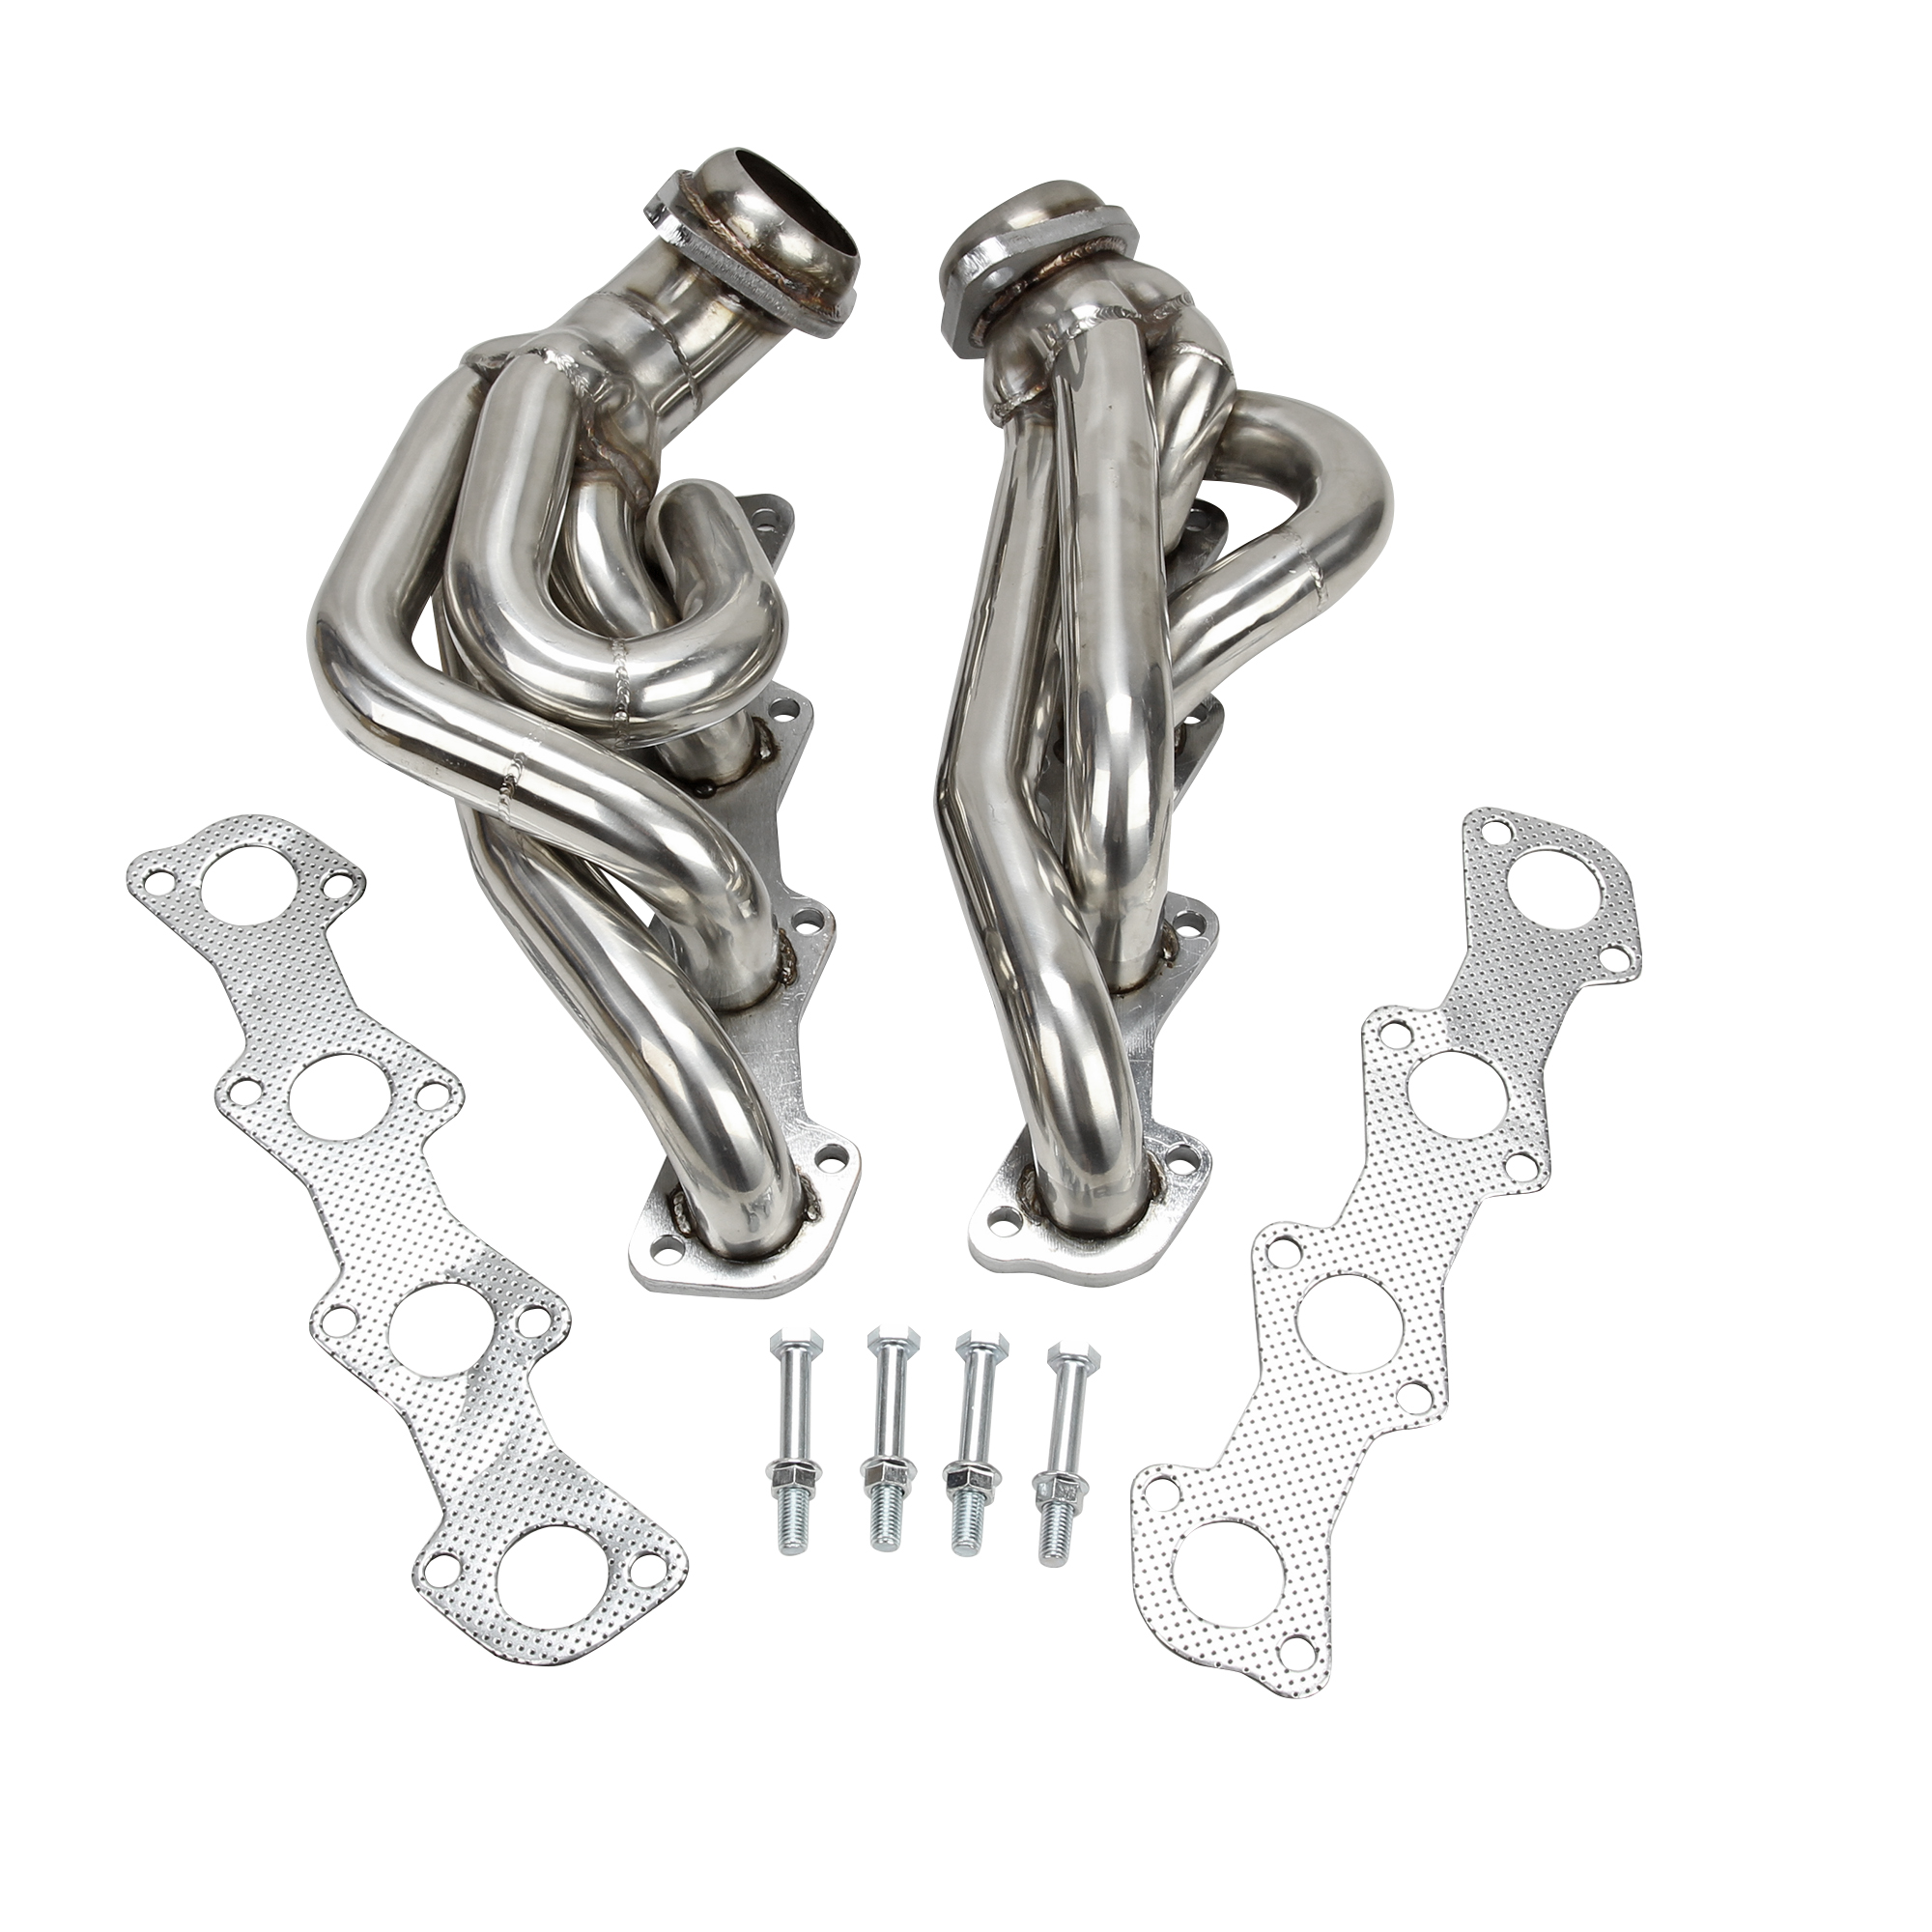 Exhaust Manifold Header for 1997-2003 Ford F150 F250 EXPEDITION V8 5.4L